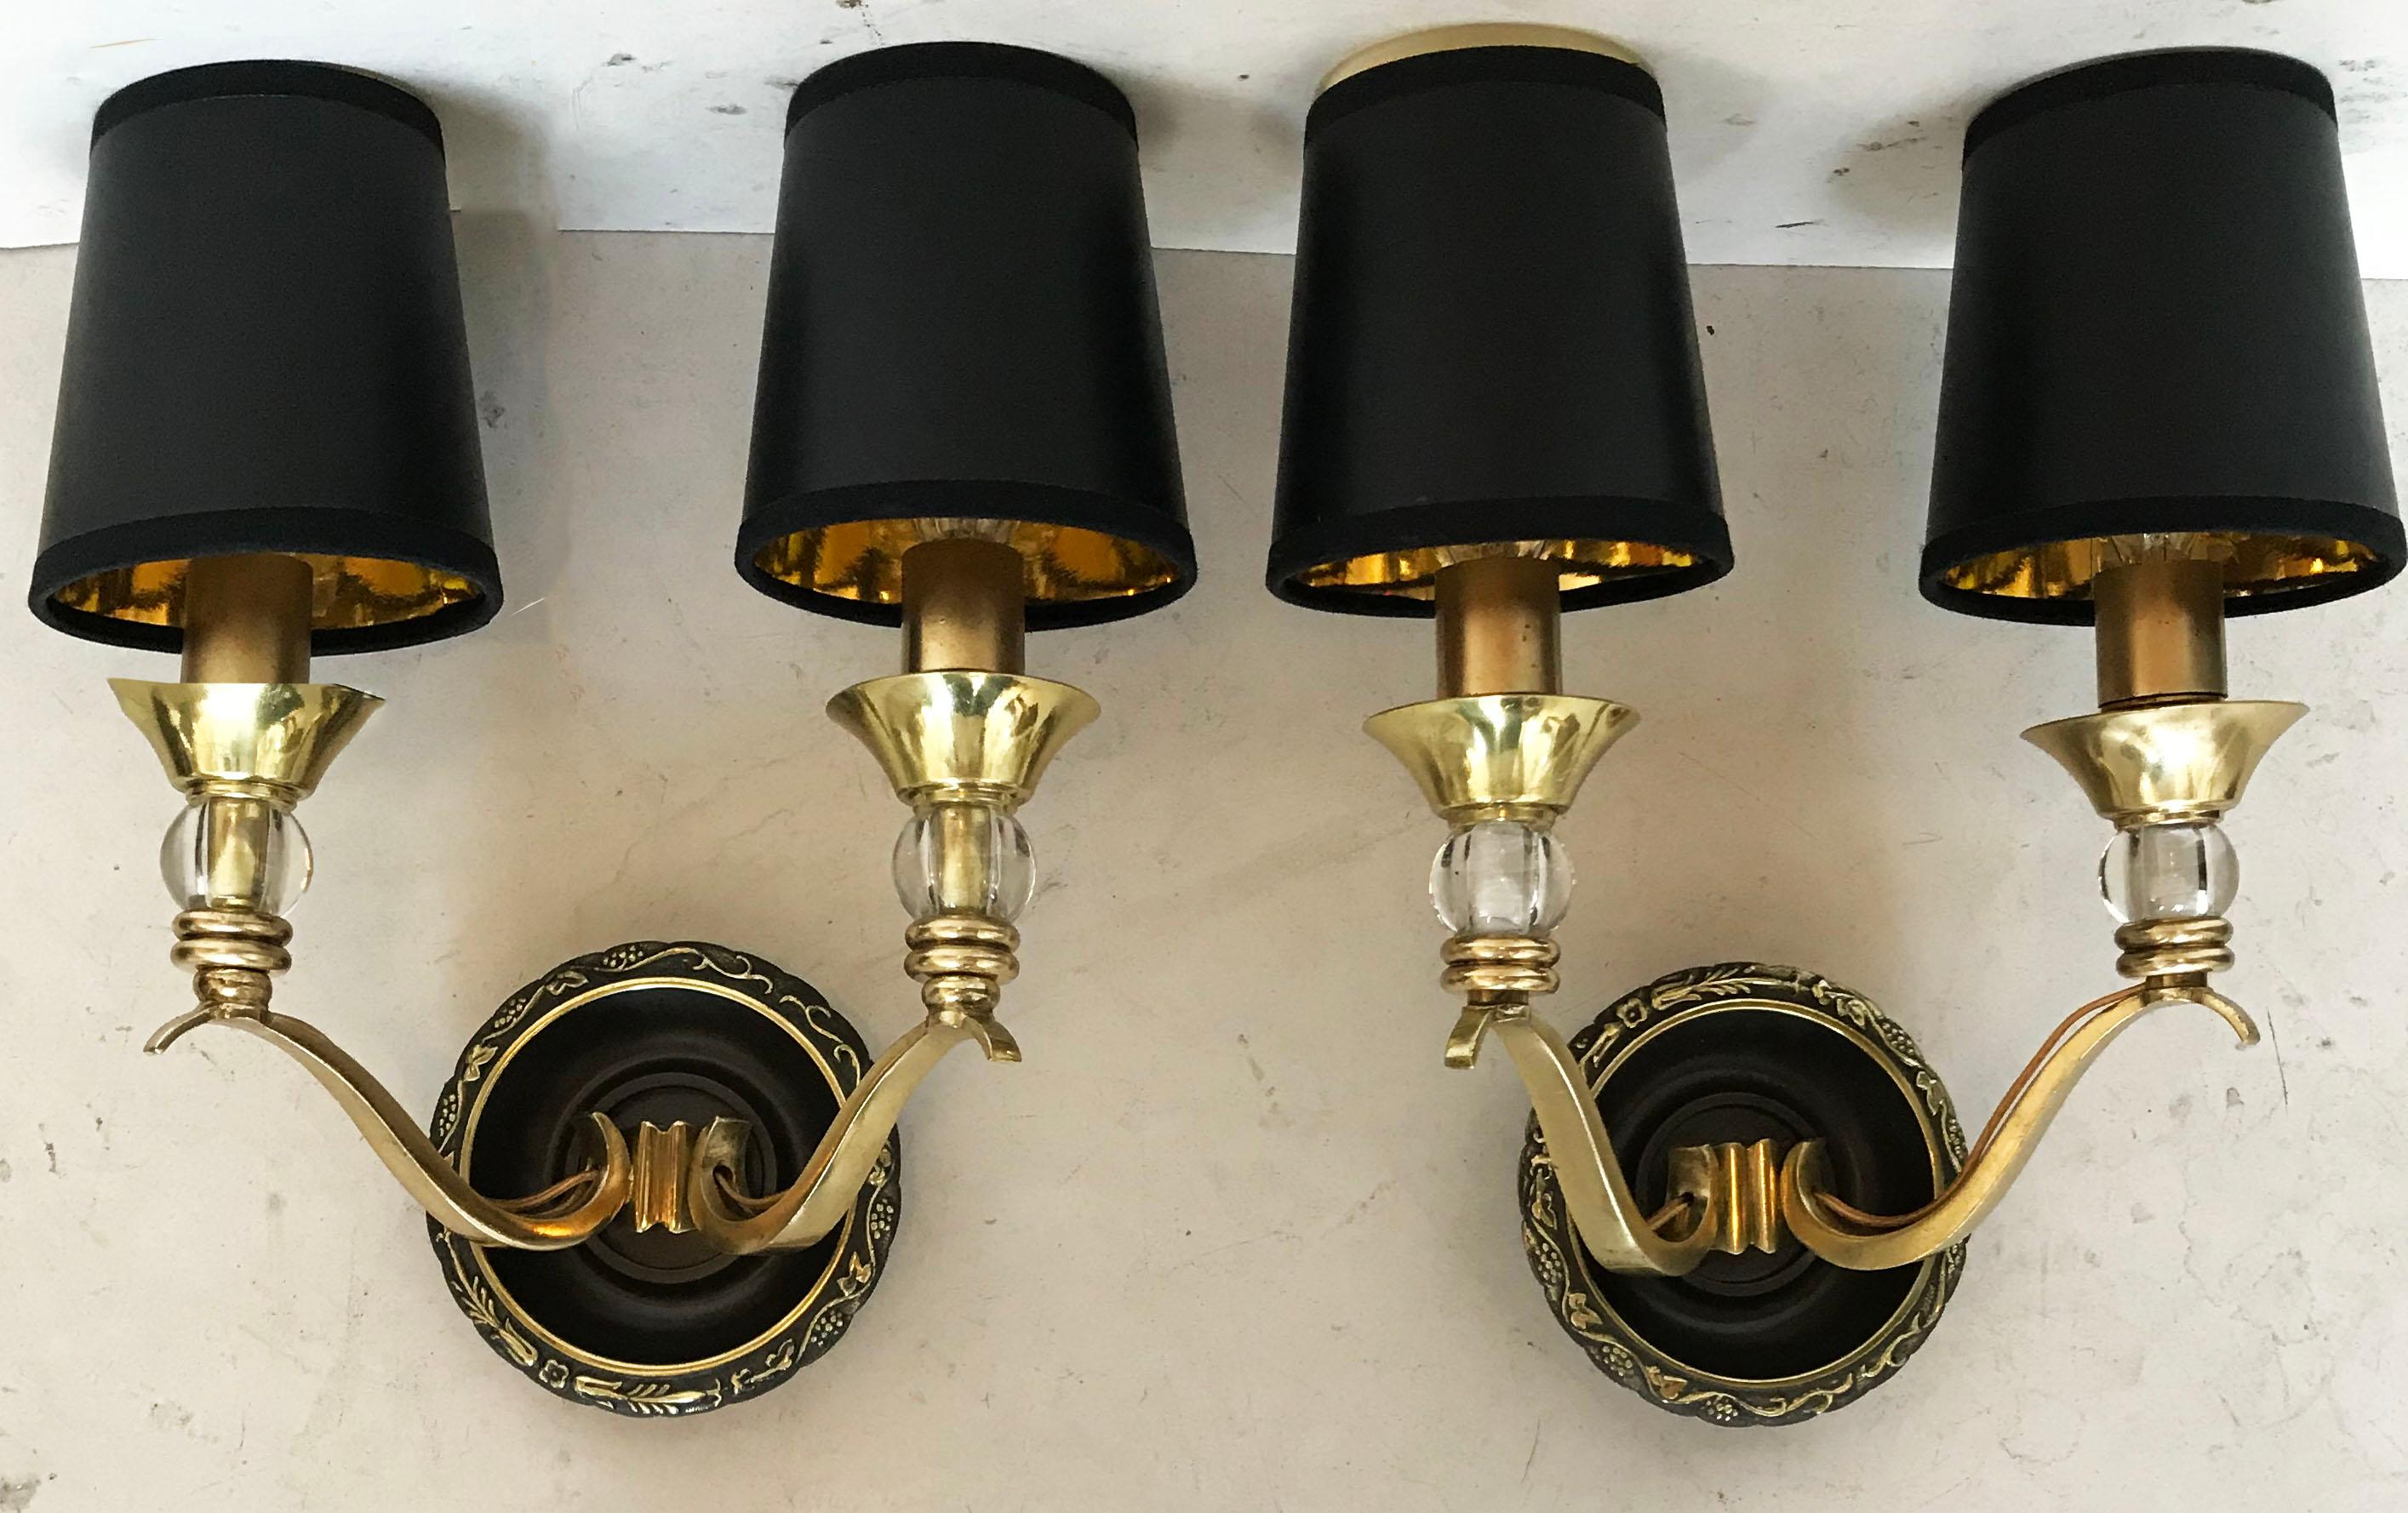 Pair of Maison Lunel Sconces In Excellent Condition For Sale In Miami, FL